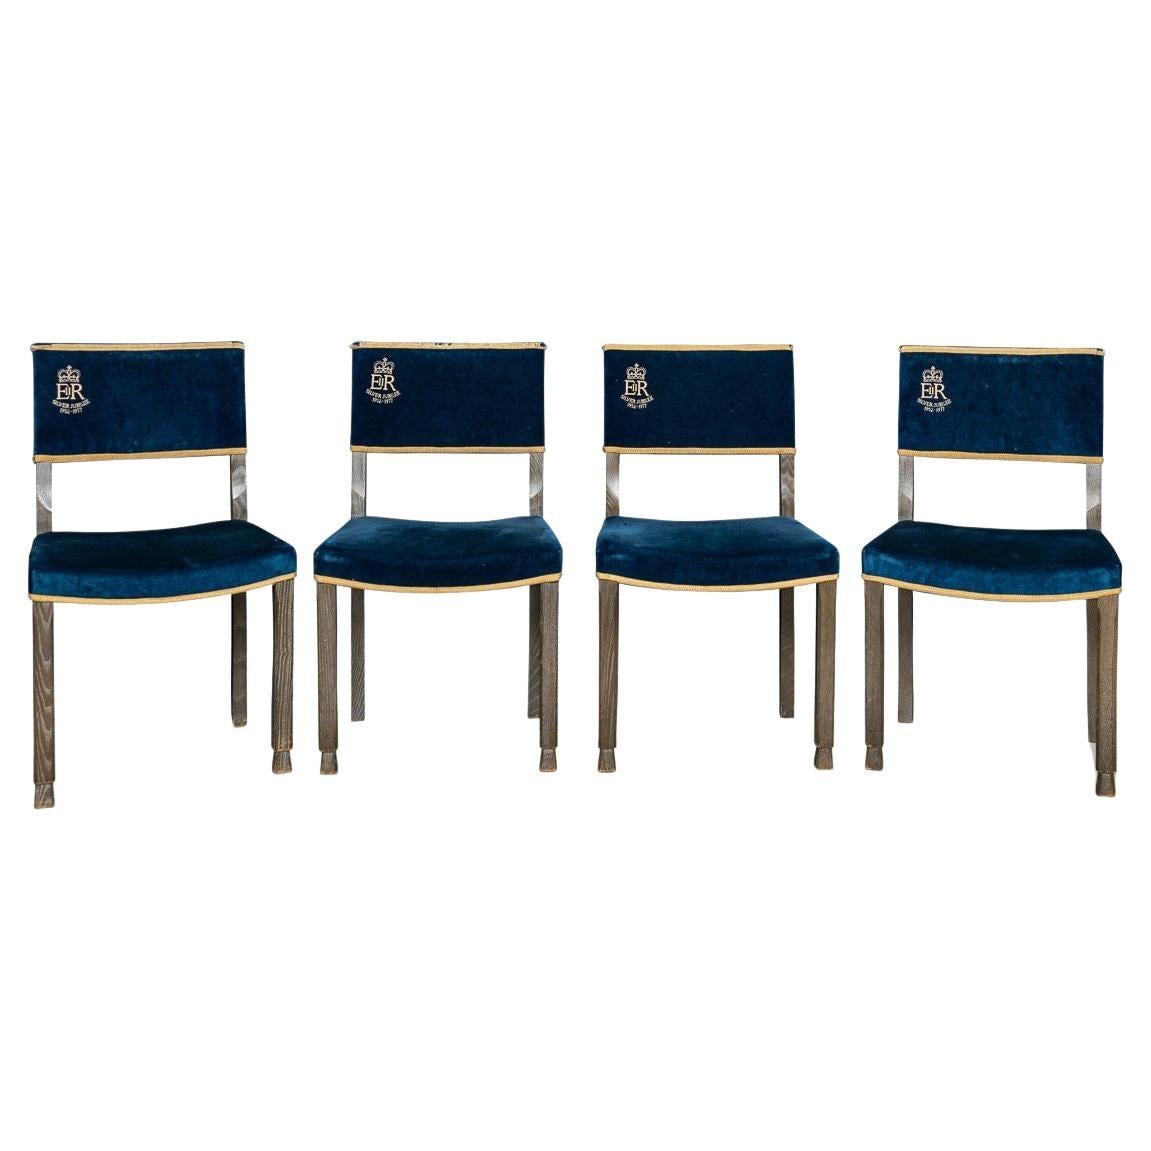 Set Of Four Silver Jubilee Commemorative Chairs By Hands Of Wycombe c.1977